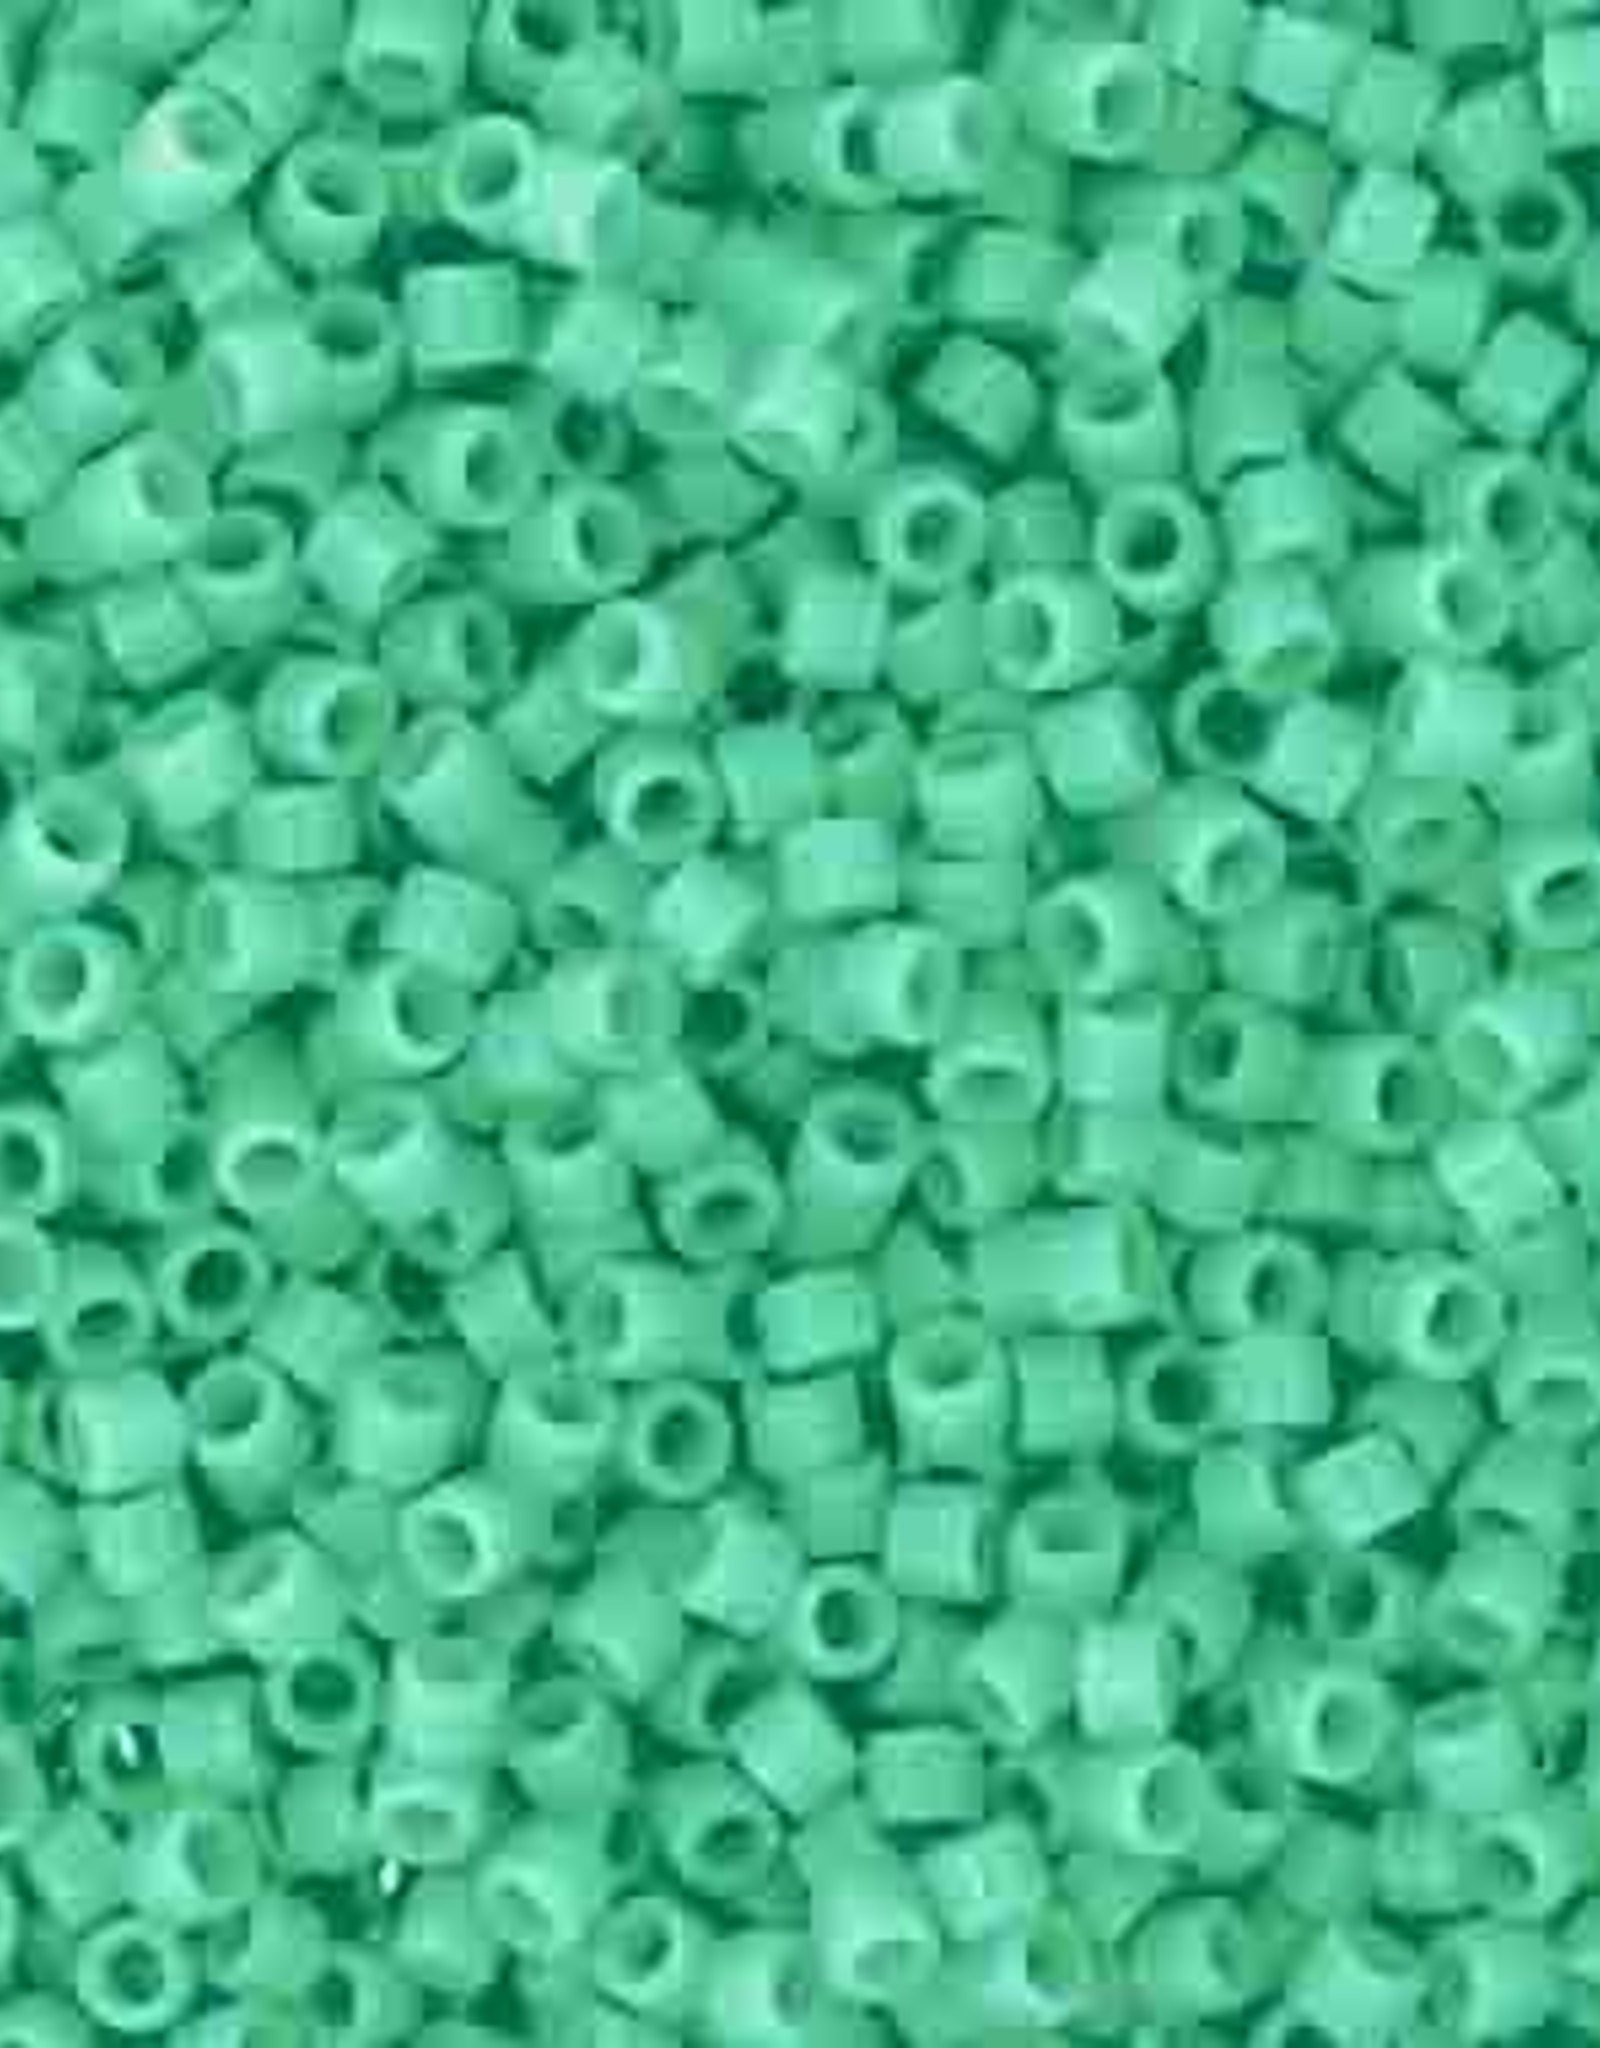 Miyuki Delica Seed Beads Delica Program 11/0 Rd Duracoat Opaque Dyed Turquoise Green 2125V